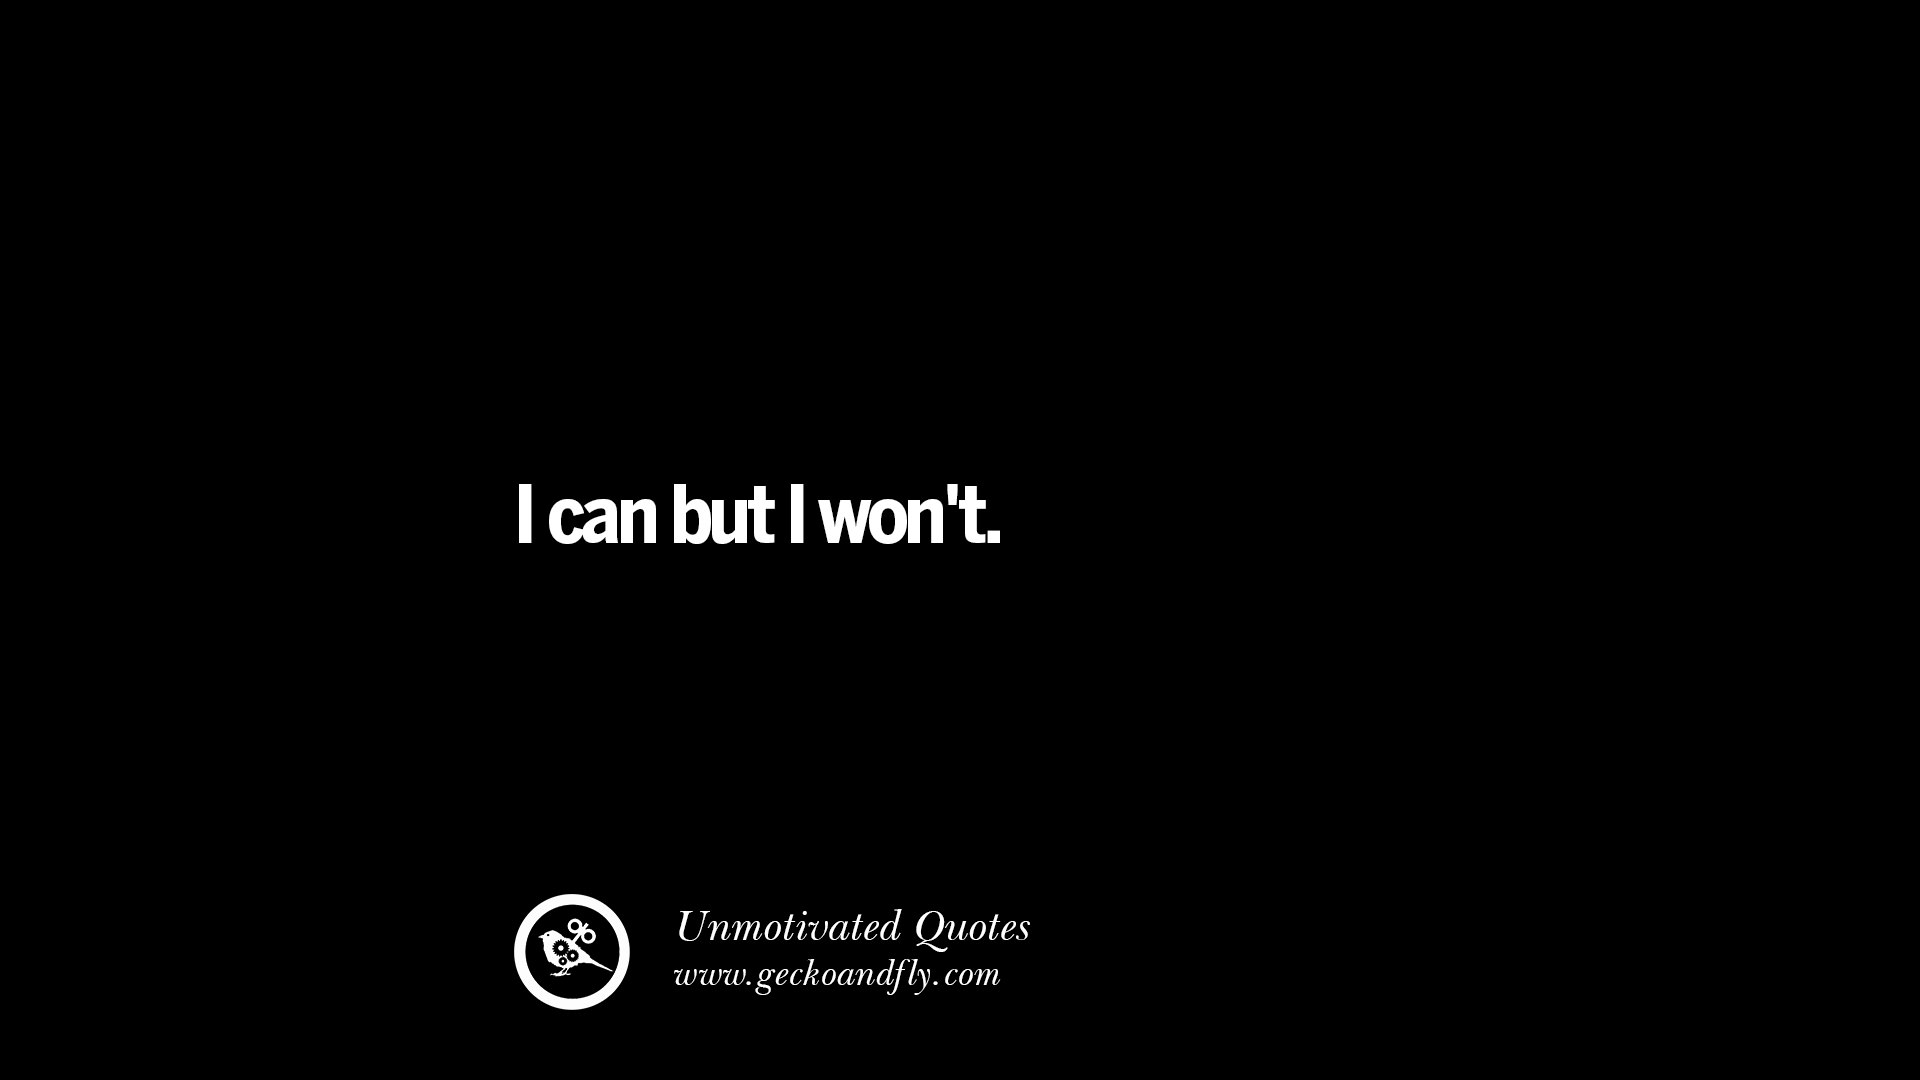 unmotivated motivated quotes 02